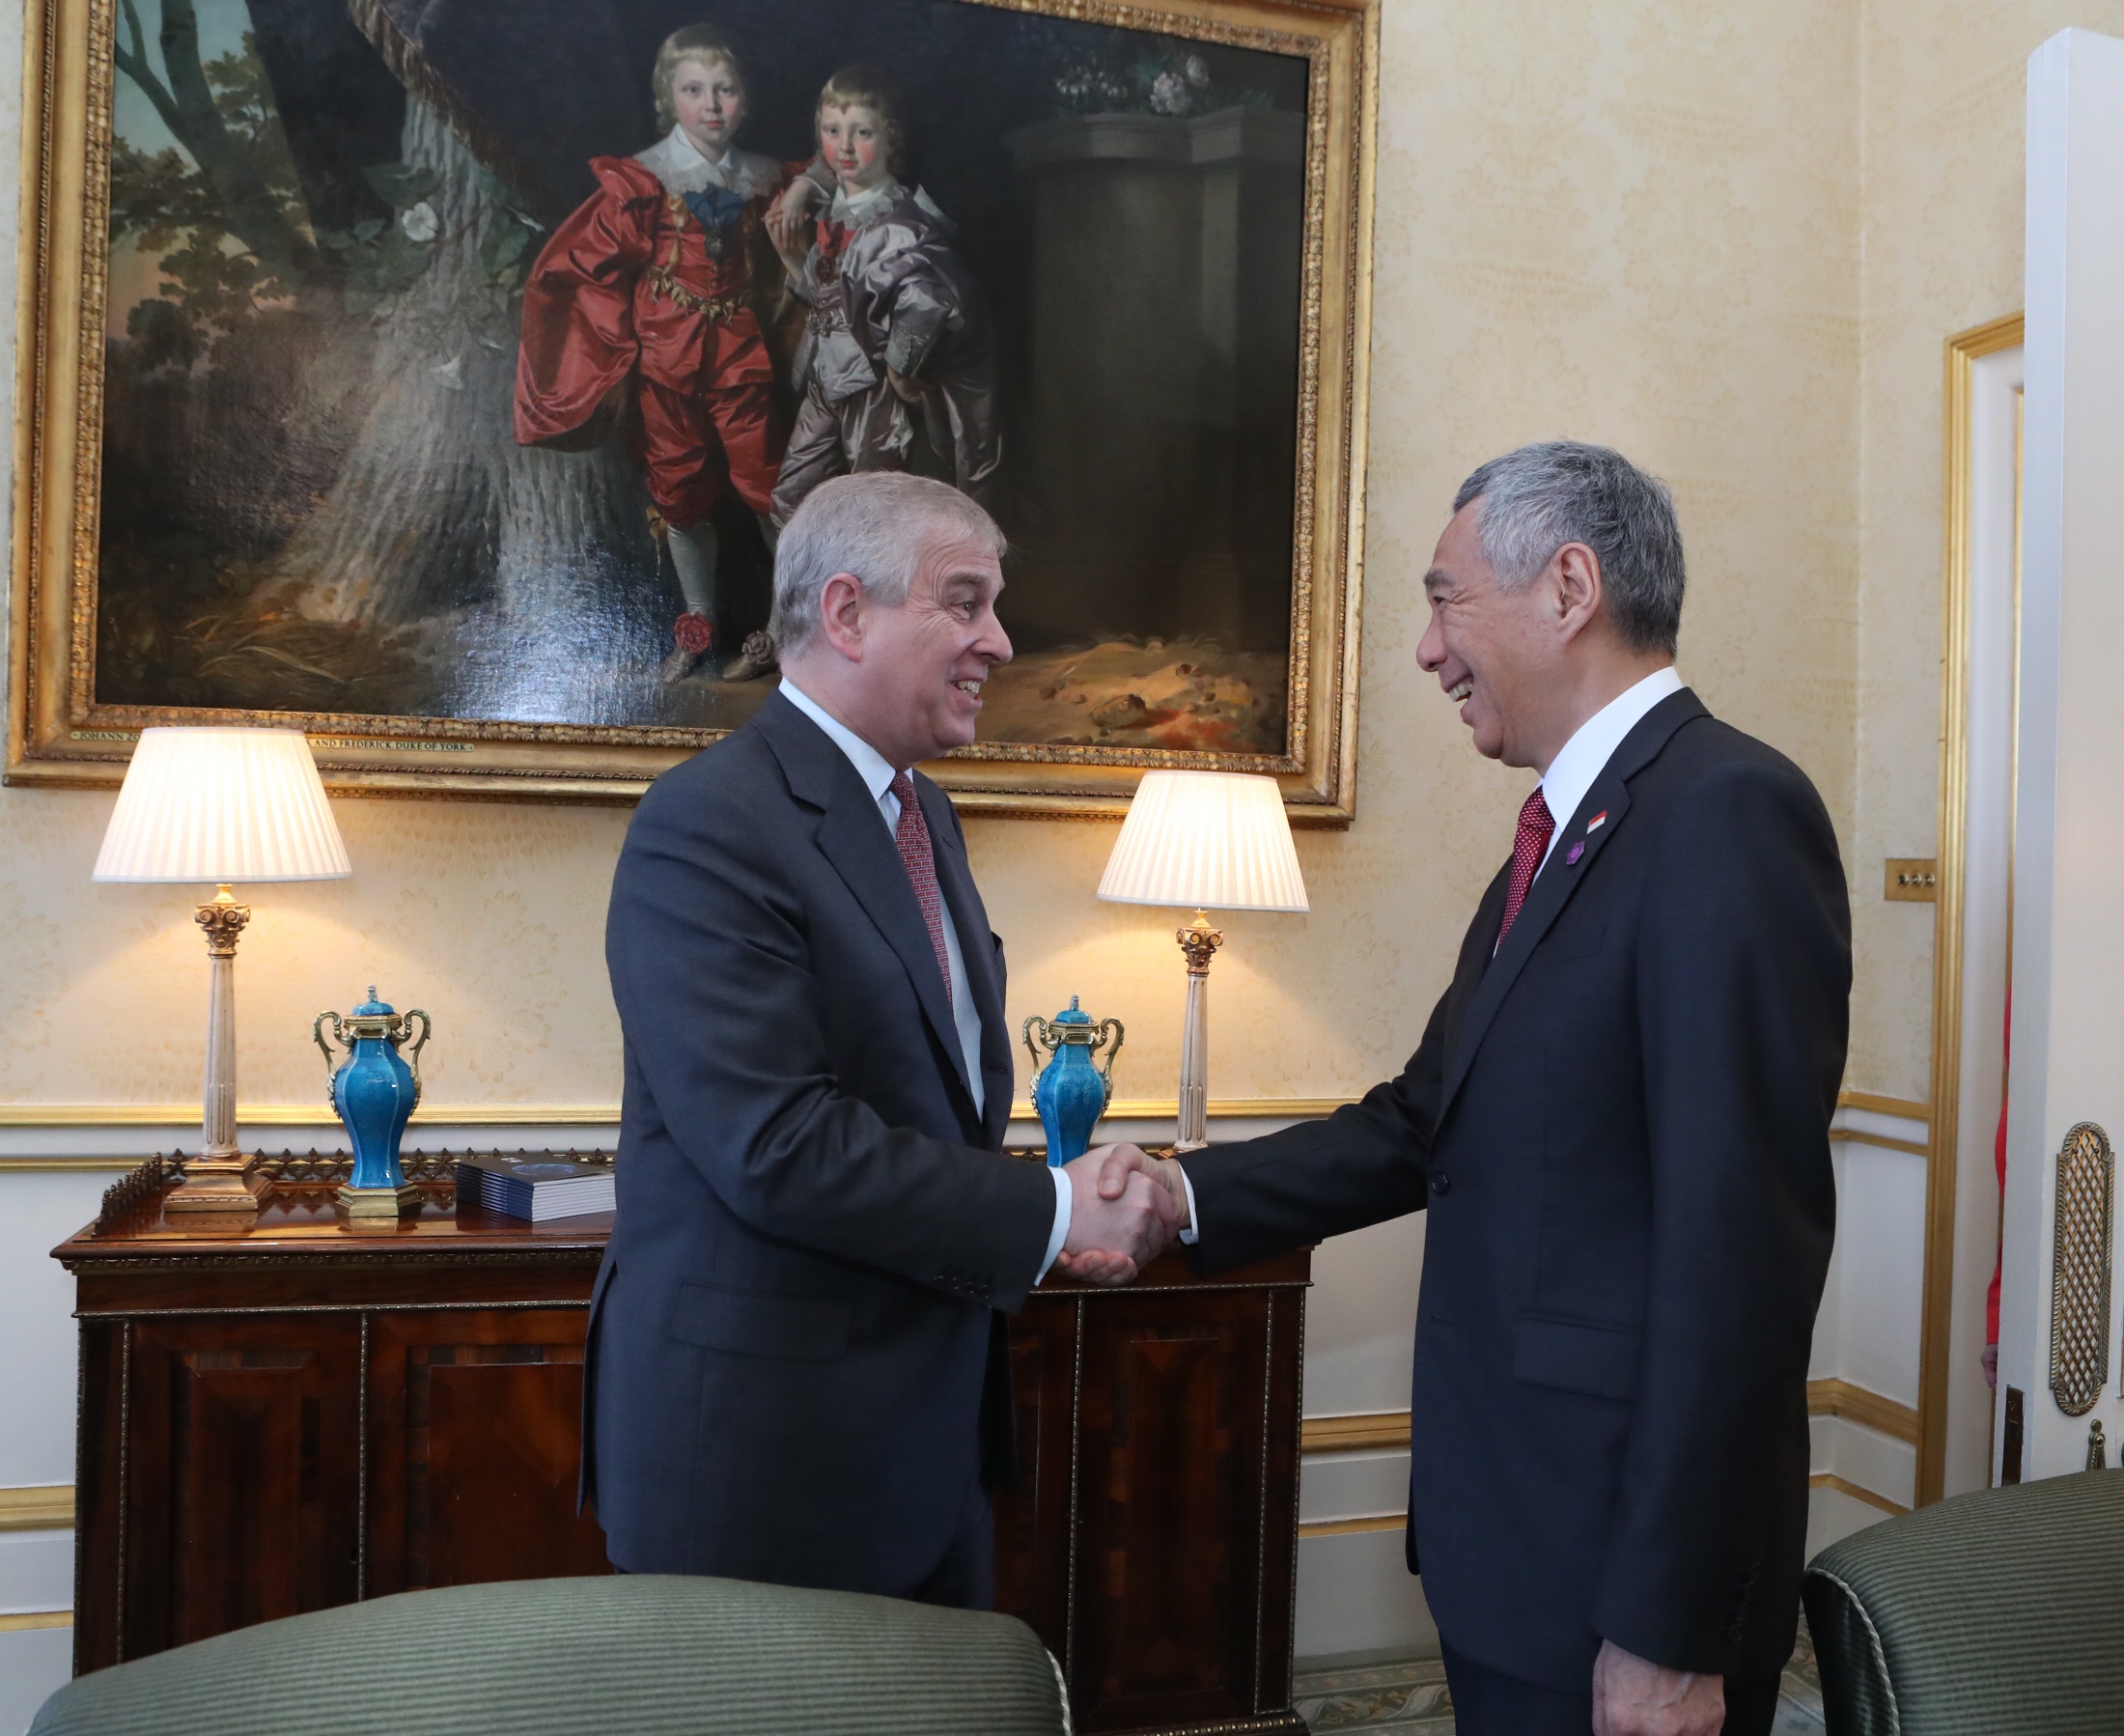 PM Lee Hsien Loong with Prince Andrew, the Duke of York on 18 April 2018 (MCI Photo by Betty Chua)